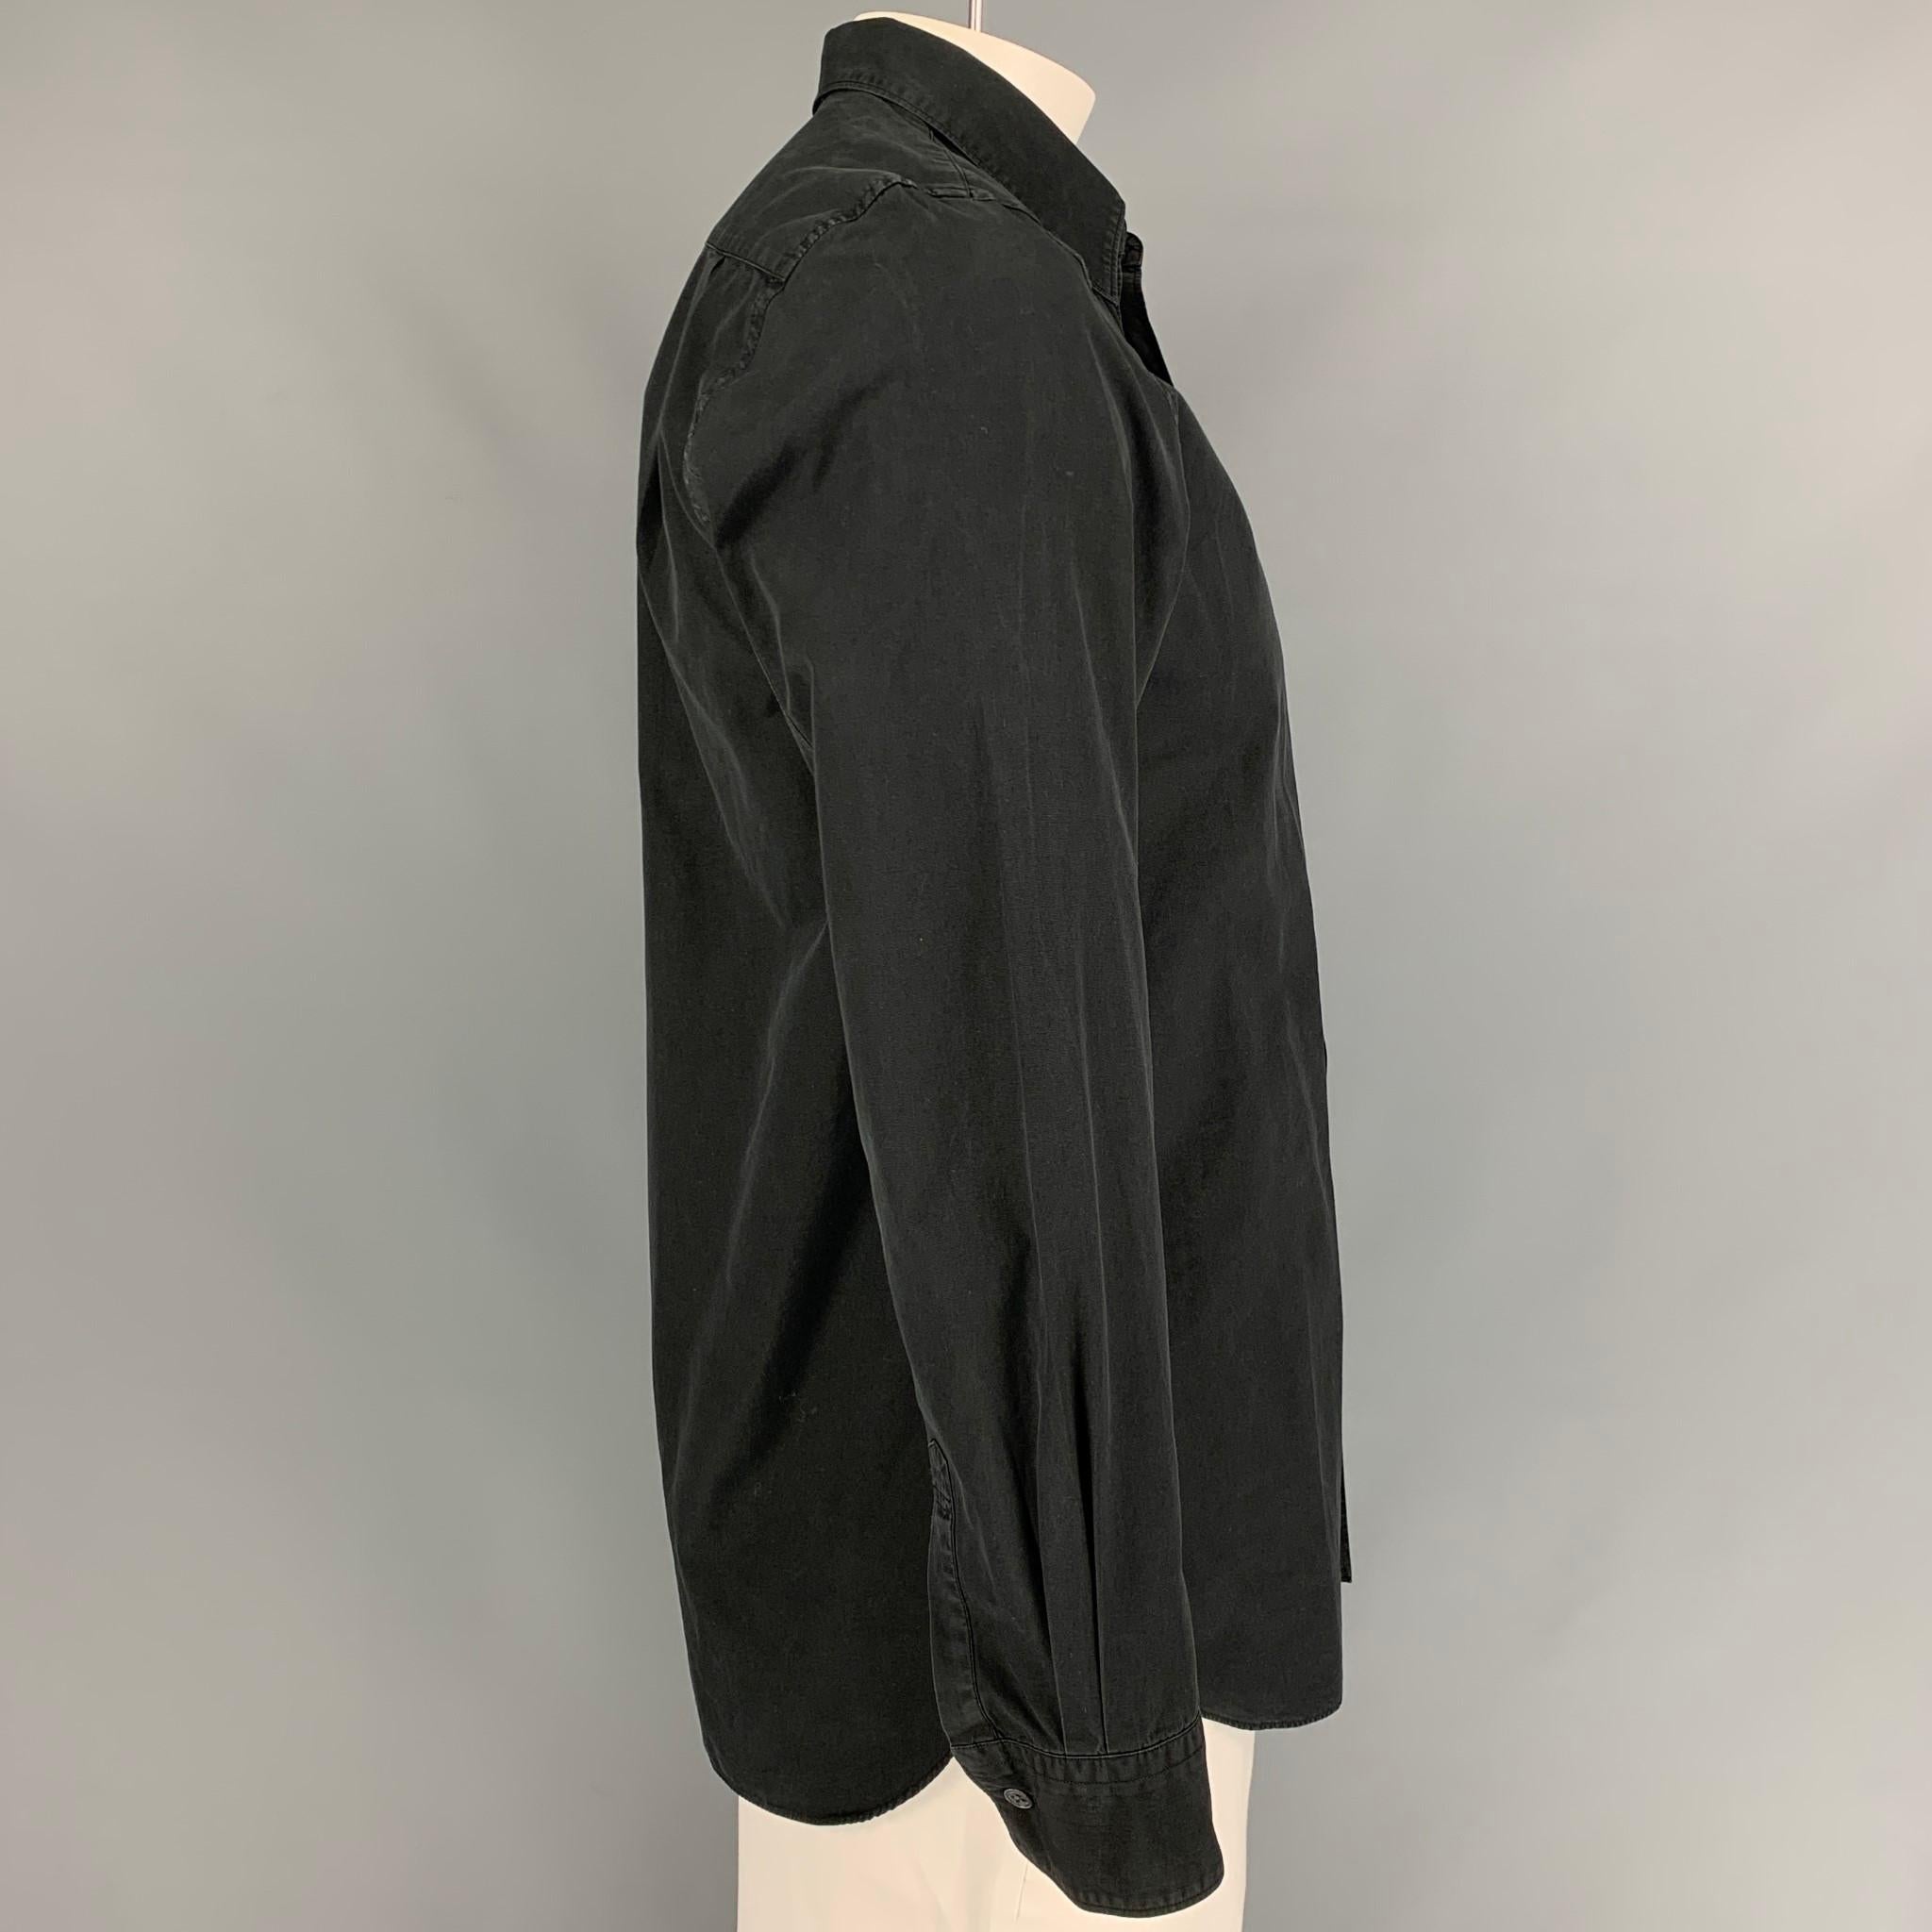 COMME des GARCONS SHIRT long sleeve shirt comes in a black cotton featuring a spread collar, front pocket, and a buttoned closure. Made in France. 

Good Pre-Owned Condition.
Marked: L

Measurements:

Shoulder: 17 in.
Chest: 42 in.
Sleeve: 25.5